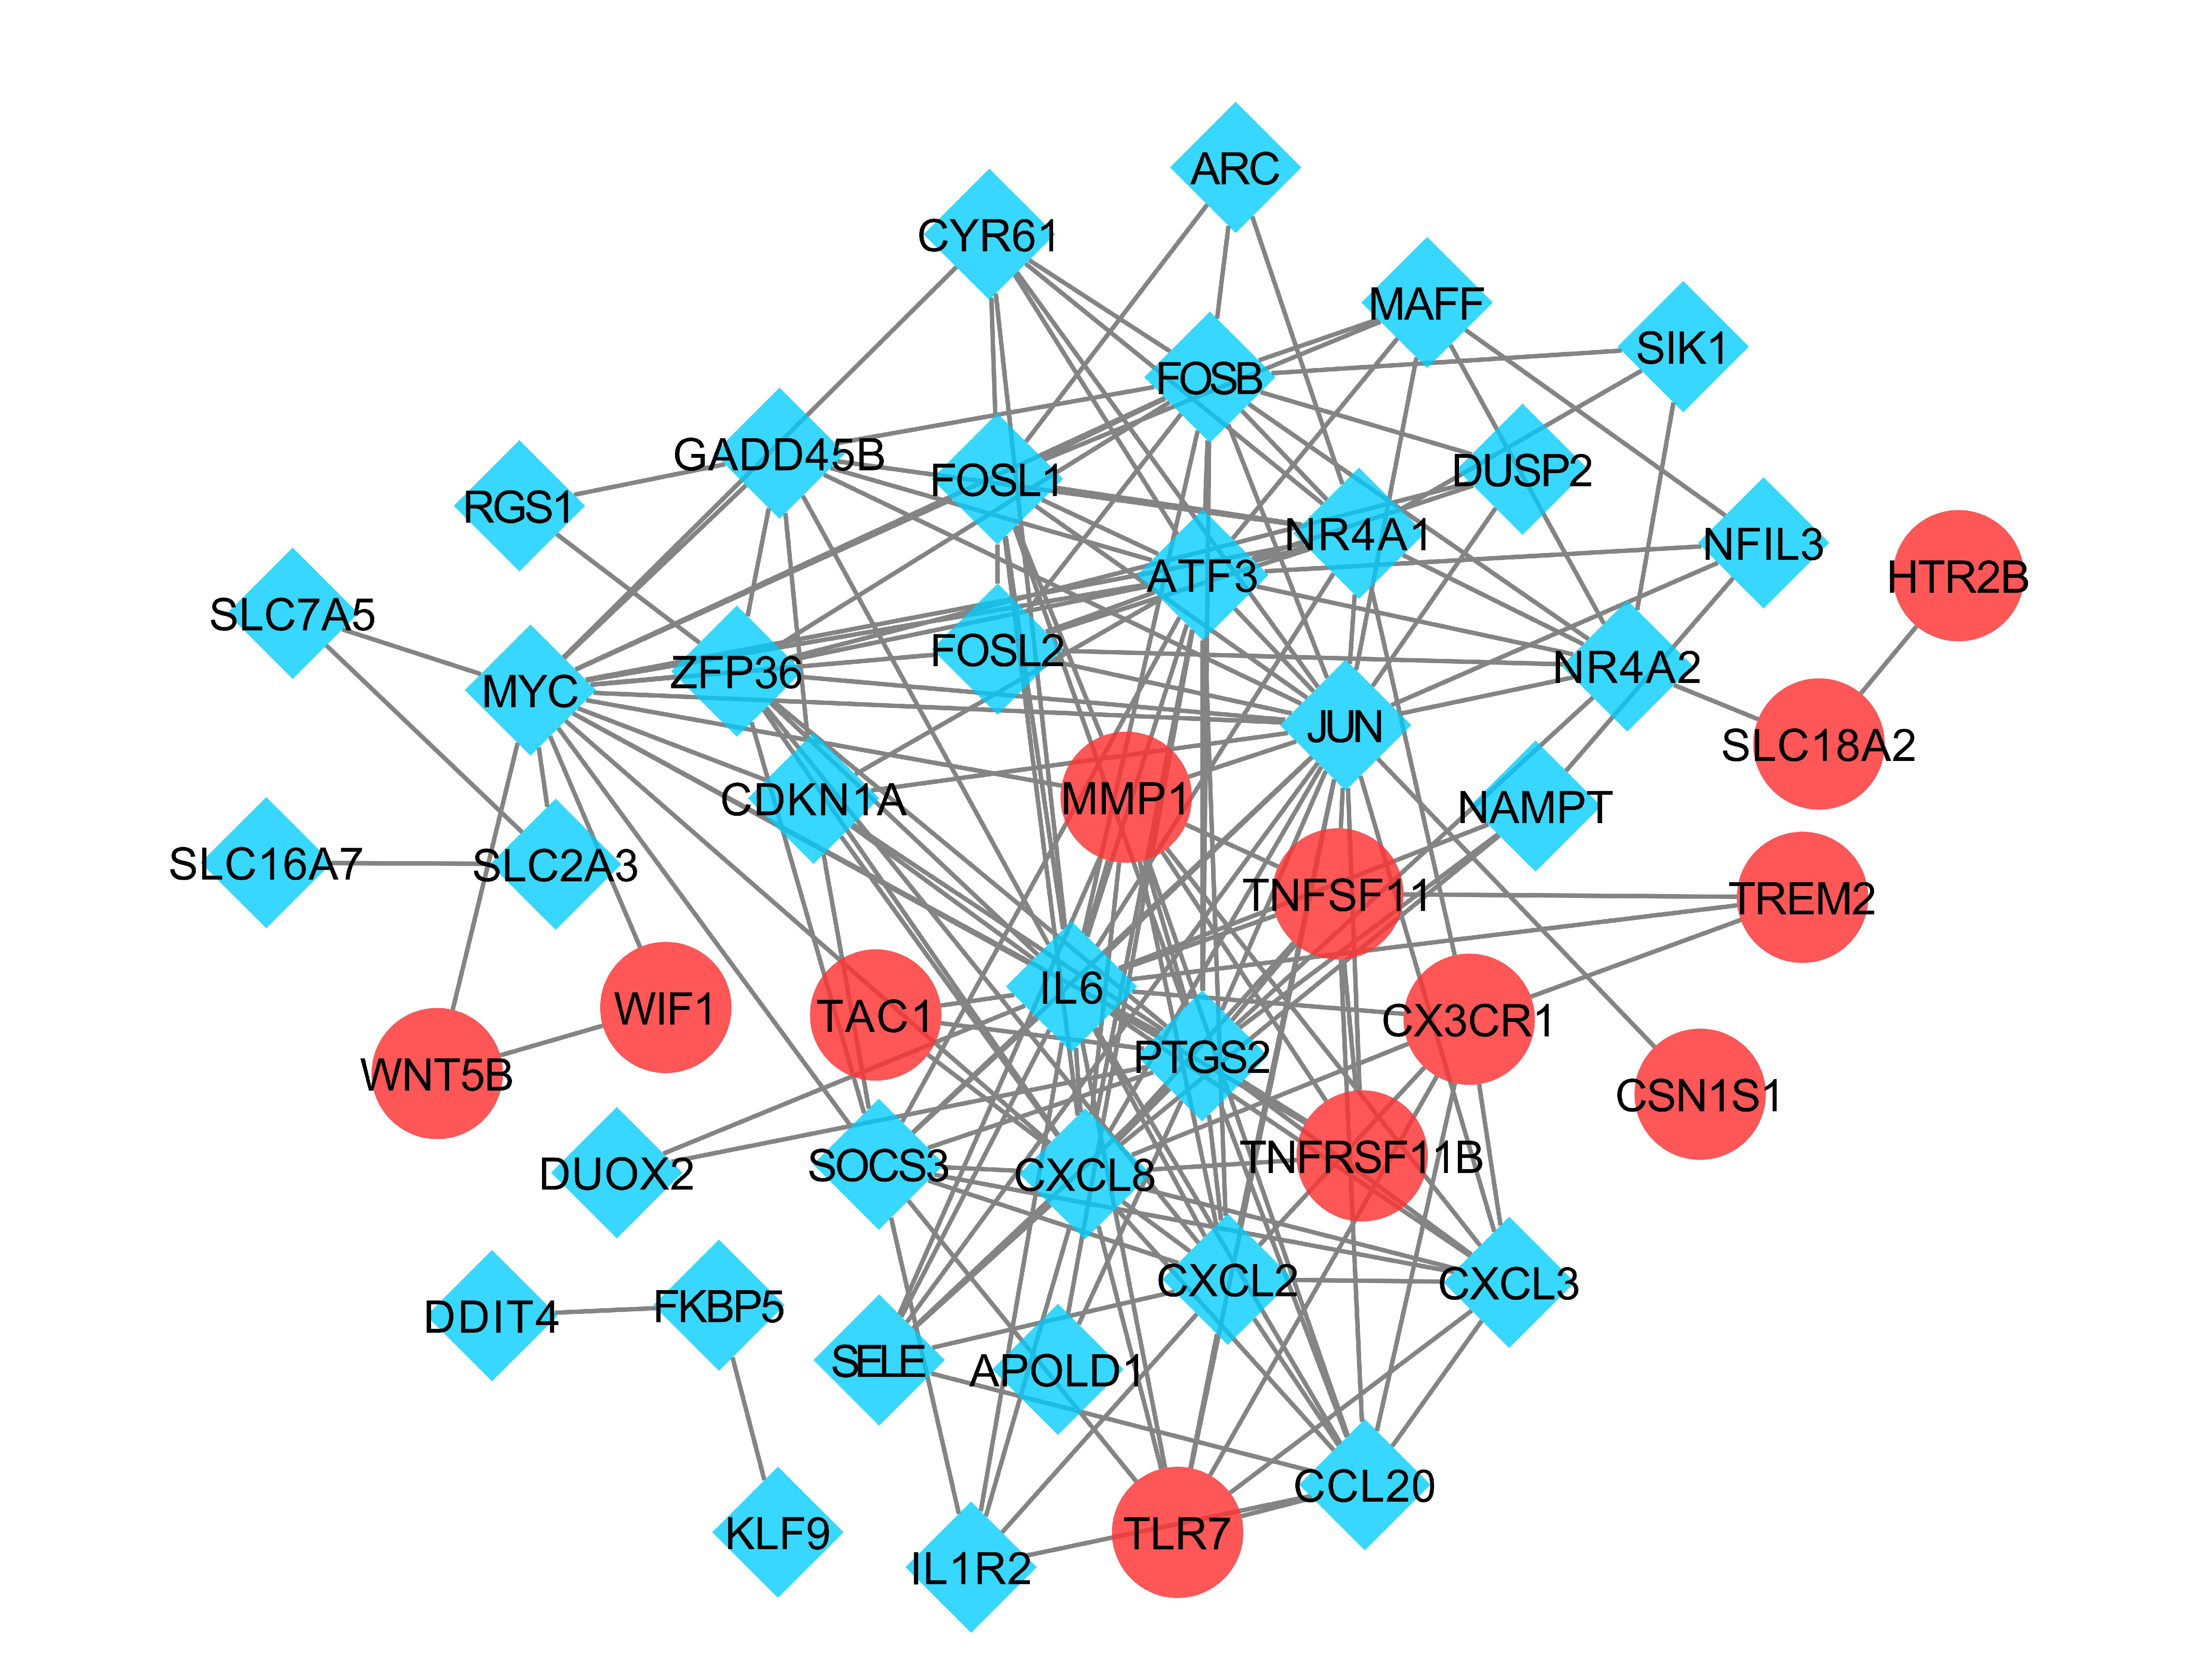 Fig. 3 
            Protein-protein interaction network of differentially expressed genes (DEGs). The interaction network between proteins coded by DEGs was constructed based on STRING database and Cytoscape software. ARC, activity regulated cytoskeleton associated protein; APOLD1, apolipoprotein L domain containing 1; ATF3, activating transcription factor 3; CCL20, C-C motif chemokine ligand 20; CDKN1A, cyclin dependent kinase inhibitor 1A; CSN1S1, casein alpha s1; CXCL8, C-X-C motif chemokine ligand 8; CXCL2, C-X-C motif chemokine ligand 2; CXCL3, C-X-C motif chemokine ligand 3; CX3CR1, C-X3-C motif chemokine receptor 1; CYR61, as known as CCN1, cellular communication network factor 1; DDIT4, DNA damage inducible transcript 4; DUOX2, dual oxidase 2; DUSP2, dual specificity phosphatase 2; FOSB, FosB proto-oncogene, AP-1 transcription factor subunit; FOSL1, FOS like 1, AP-1 transcription factor subunit; FOSL2, FOS like 2, AP-1 transcription factor subunit; FKBP5, FKBP prolyl isomerase 5; GADD45B, growth arrest and DNA damage inducible beta; HTR2B, 5-hydroxytryptamine receptor 2B; IL1R2, interleukin 1 receptor type 2; IL6, interleukin 6; JUN, Jun proto-oncogene, AP-1 transcription factor subunit; KLF9, KLF transcription factor 9; MAFF, MAF bZIP transcription factor F; MMP1, matrix metallopeptidase 1; MYC, MYC proto-oncogene, bHLH transcription factor; NAMPT, nicotinamide phosphoribosyltransferase; NFIL3, nuclear factor, interleukin 3 regulated; NR4A1, nuclear receptor subfamily 4 group A member 1; NR4A2, nuclear receptor subfamily 4 group A member 2; PTGS2, prostaglandin-endoperoxide synthase 2; RGS1, regulator of G protein signaling 1; SELE, selectin E; SIK1, salt inducible kinase 1; SLC16A7, solute carrier family 16 member 7; SLC18A2, solute carrier family 18 member A2; SLC2A3, solute carrier family 2 member 3; SLC7A5, solute carrier family 7 member 5; SOCS3, suppressor of cytokine signaling 3; TAC1, tachykinin precursor 1; TLR7, toll like receptor 7; TNFSF11, TNF superfamily member 11; TNFRSF11B, TNF receptor superfamily member 11b; TREM2, triggering receptor expressed on myeloid cells 2; WIF1, WNT inhibitory factor 1; WNT5B, Wnt family member 5B; ZFP36, ZFP36 ring finger protein.
          